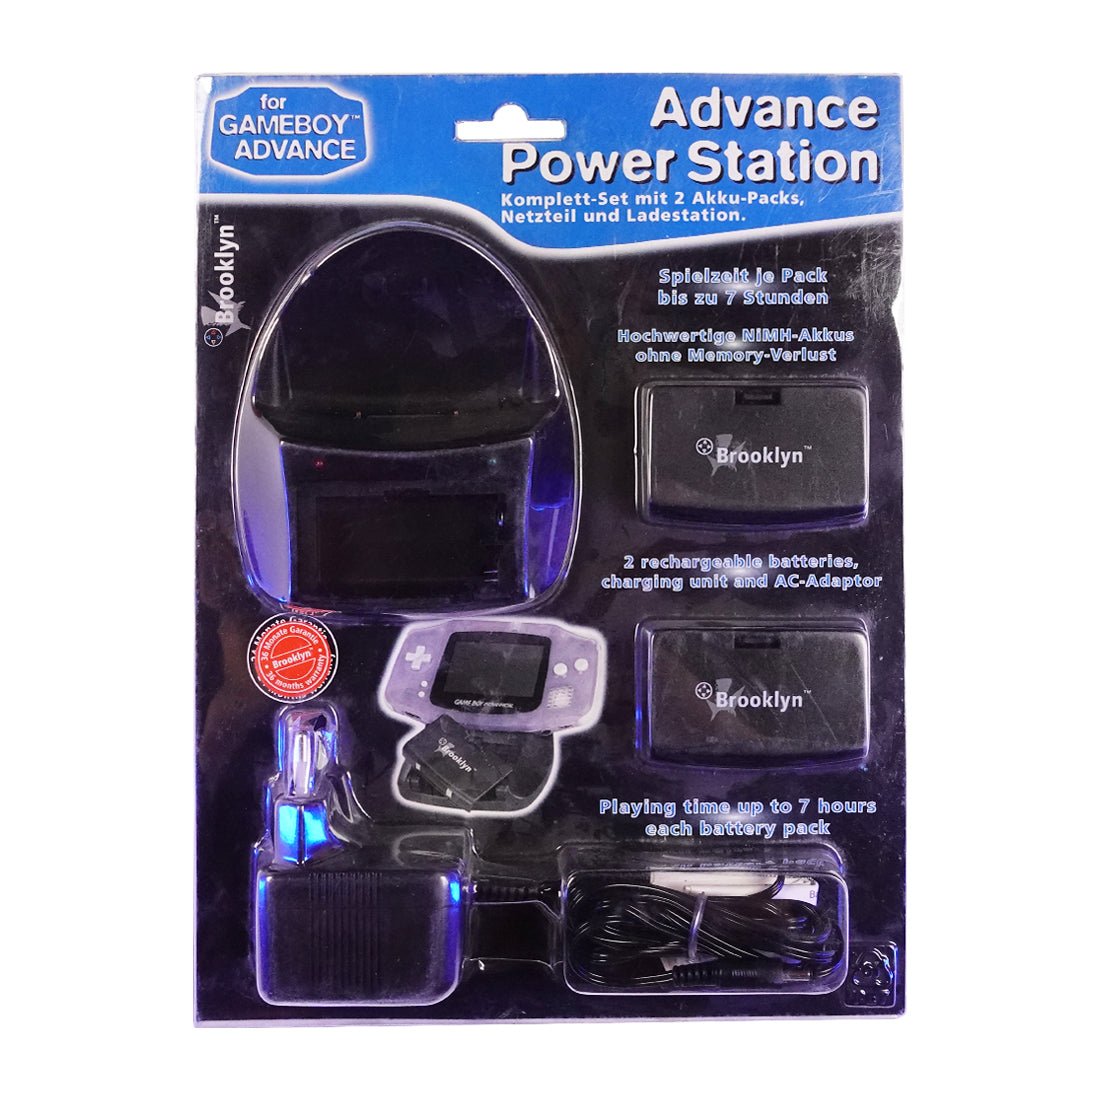 (Pre-Owned) Advance Power Station - Gameboy Advance - Store 974 | ستور ٩٧٤